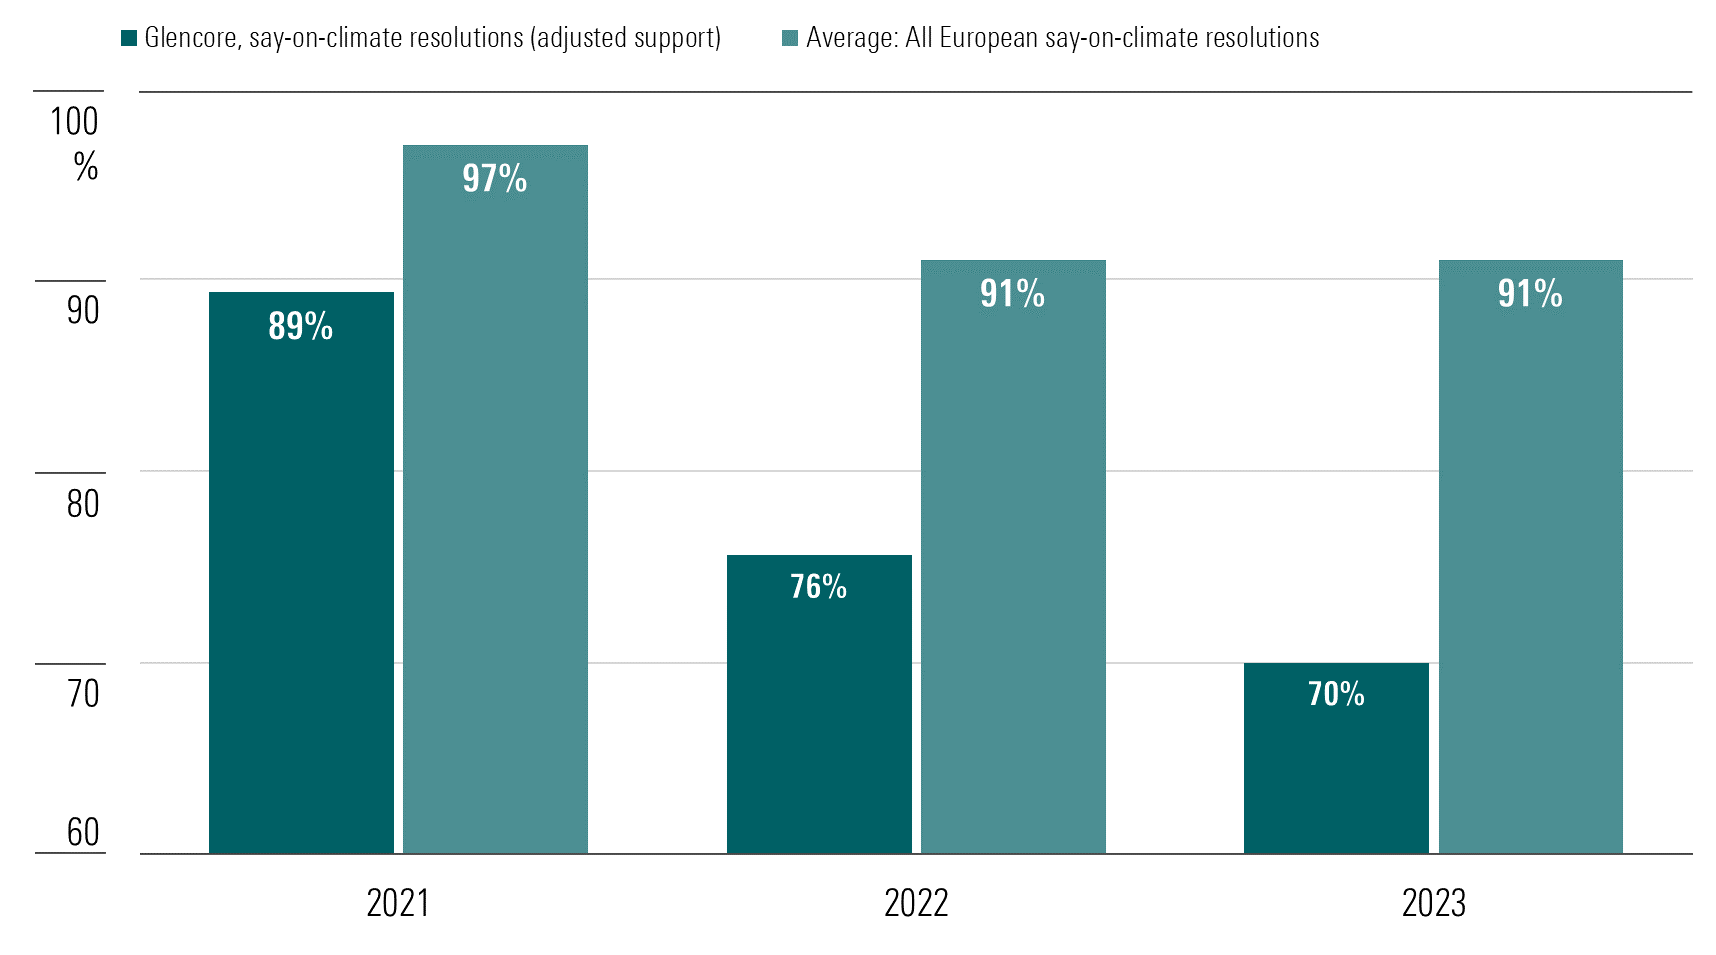 Chart showing the level of support for say-on-climate management resolutions at Glencore in the three proxy years to 2023, plotted against the average support for all European say-on-climate resolutions.